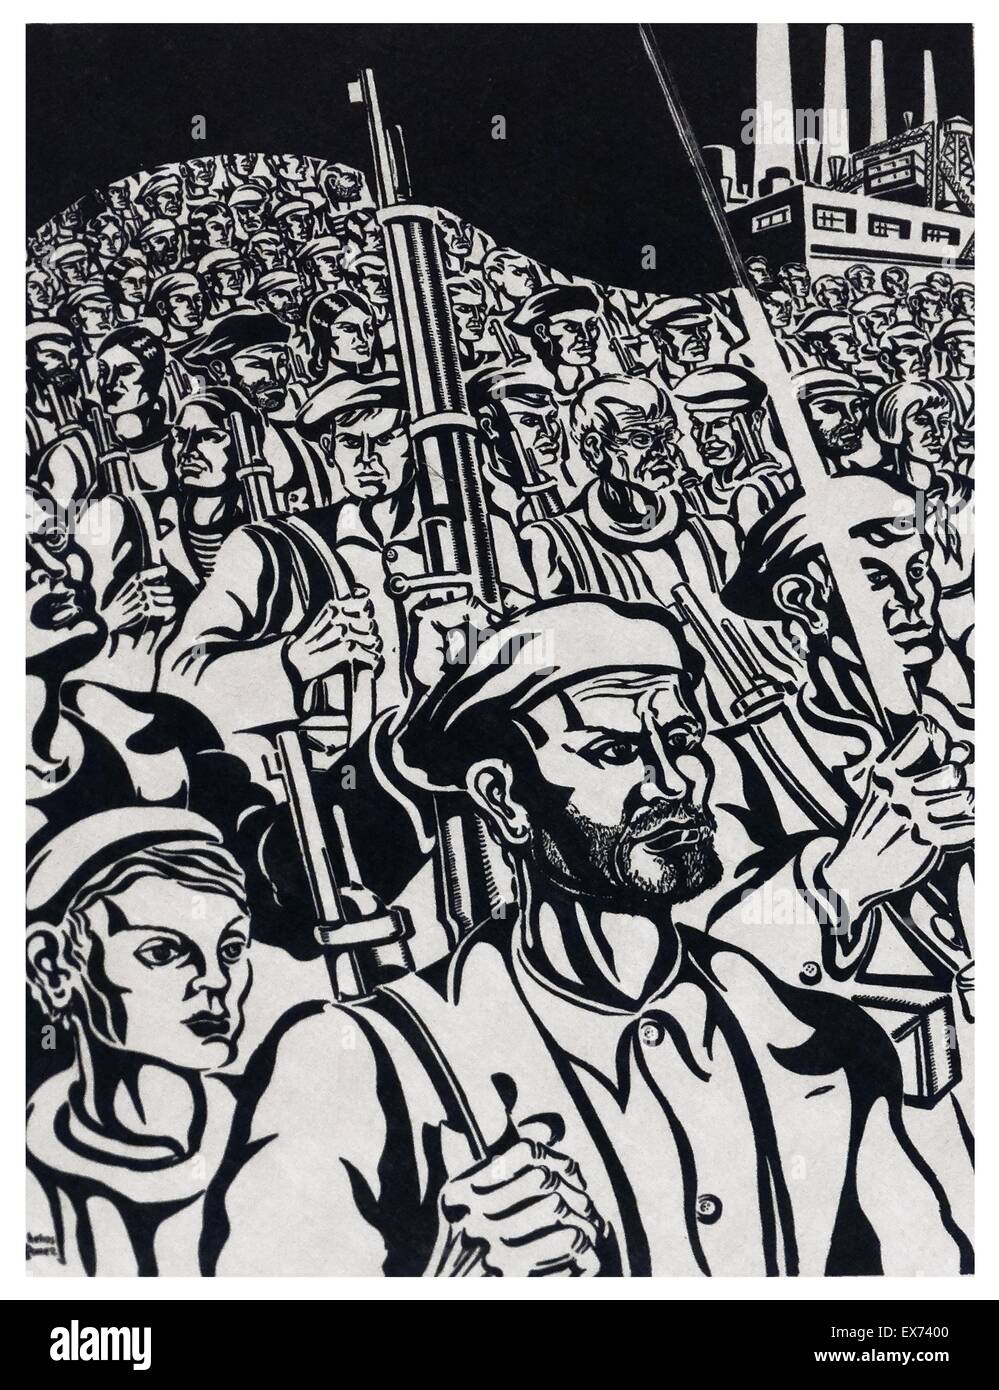 Drawing of soldiers, on paper, by the Spanish civil war artist, Francisco Mateos 1894-1976 Stock Photo